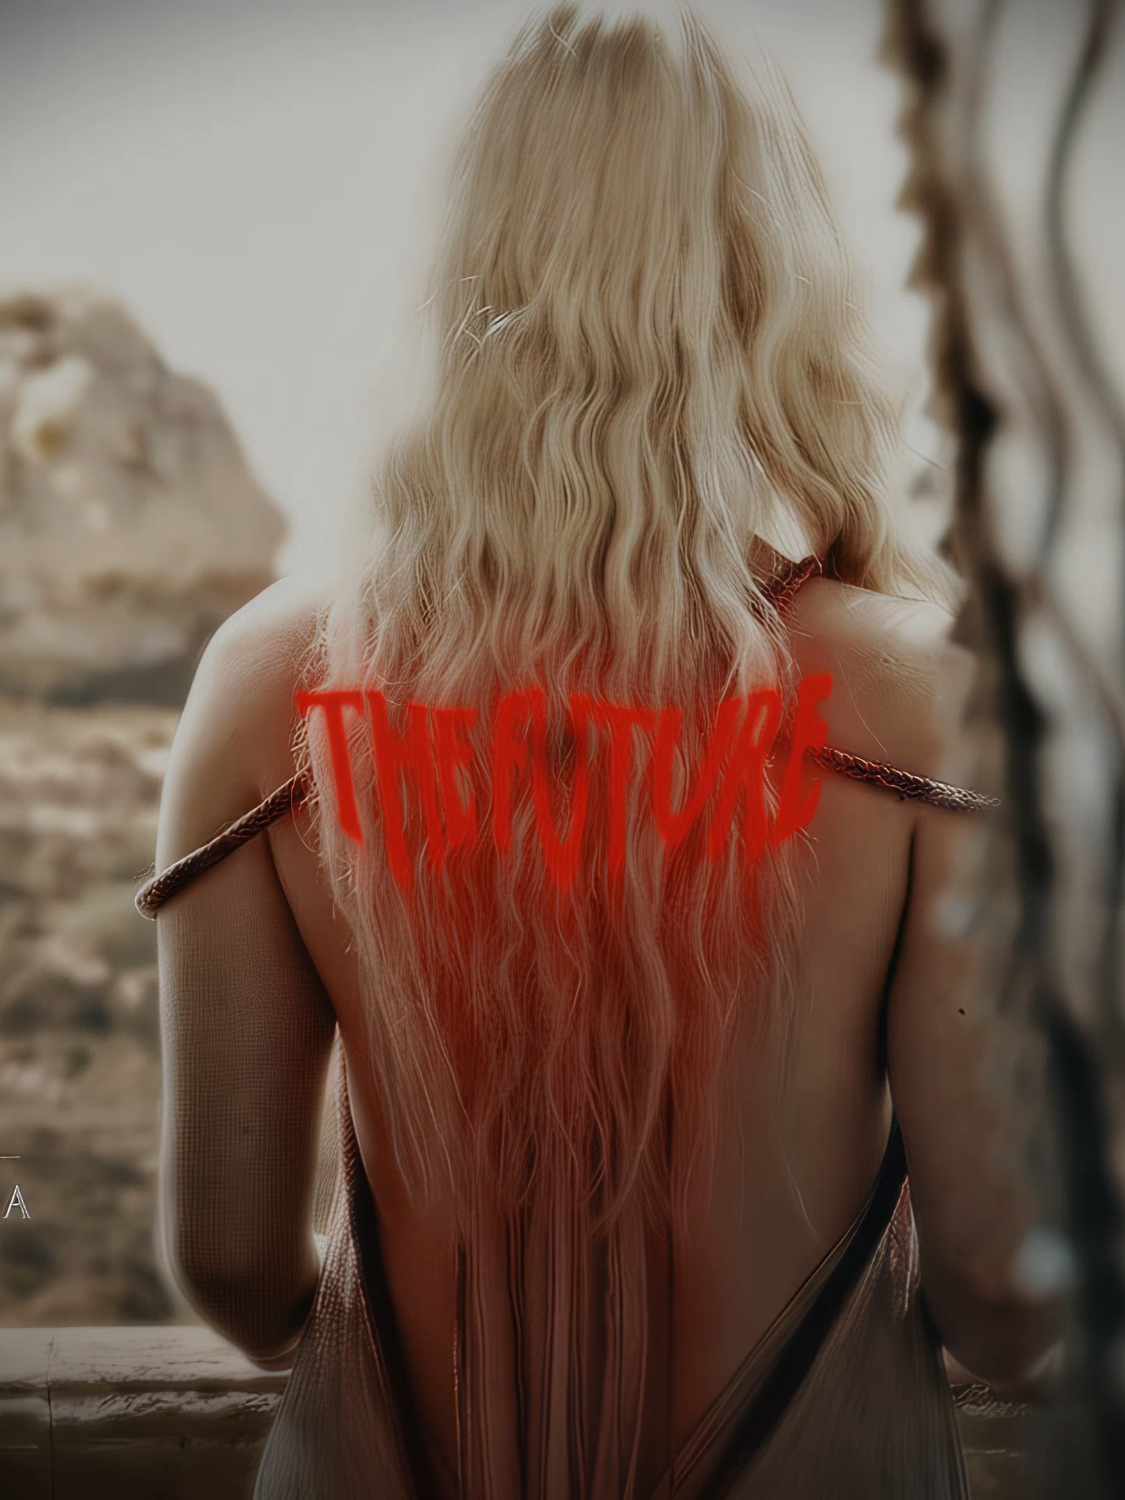 THE FUTURE │ ib: @/darks1ster #daenerys #daenerystargaryen #daenerysedit #daenerystargaryenedit #gotedit #aesthetic #aestheticedit #fy #fyp #fypシ゚ #foryou #foryoupage #viral #trending #xyzbca